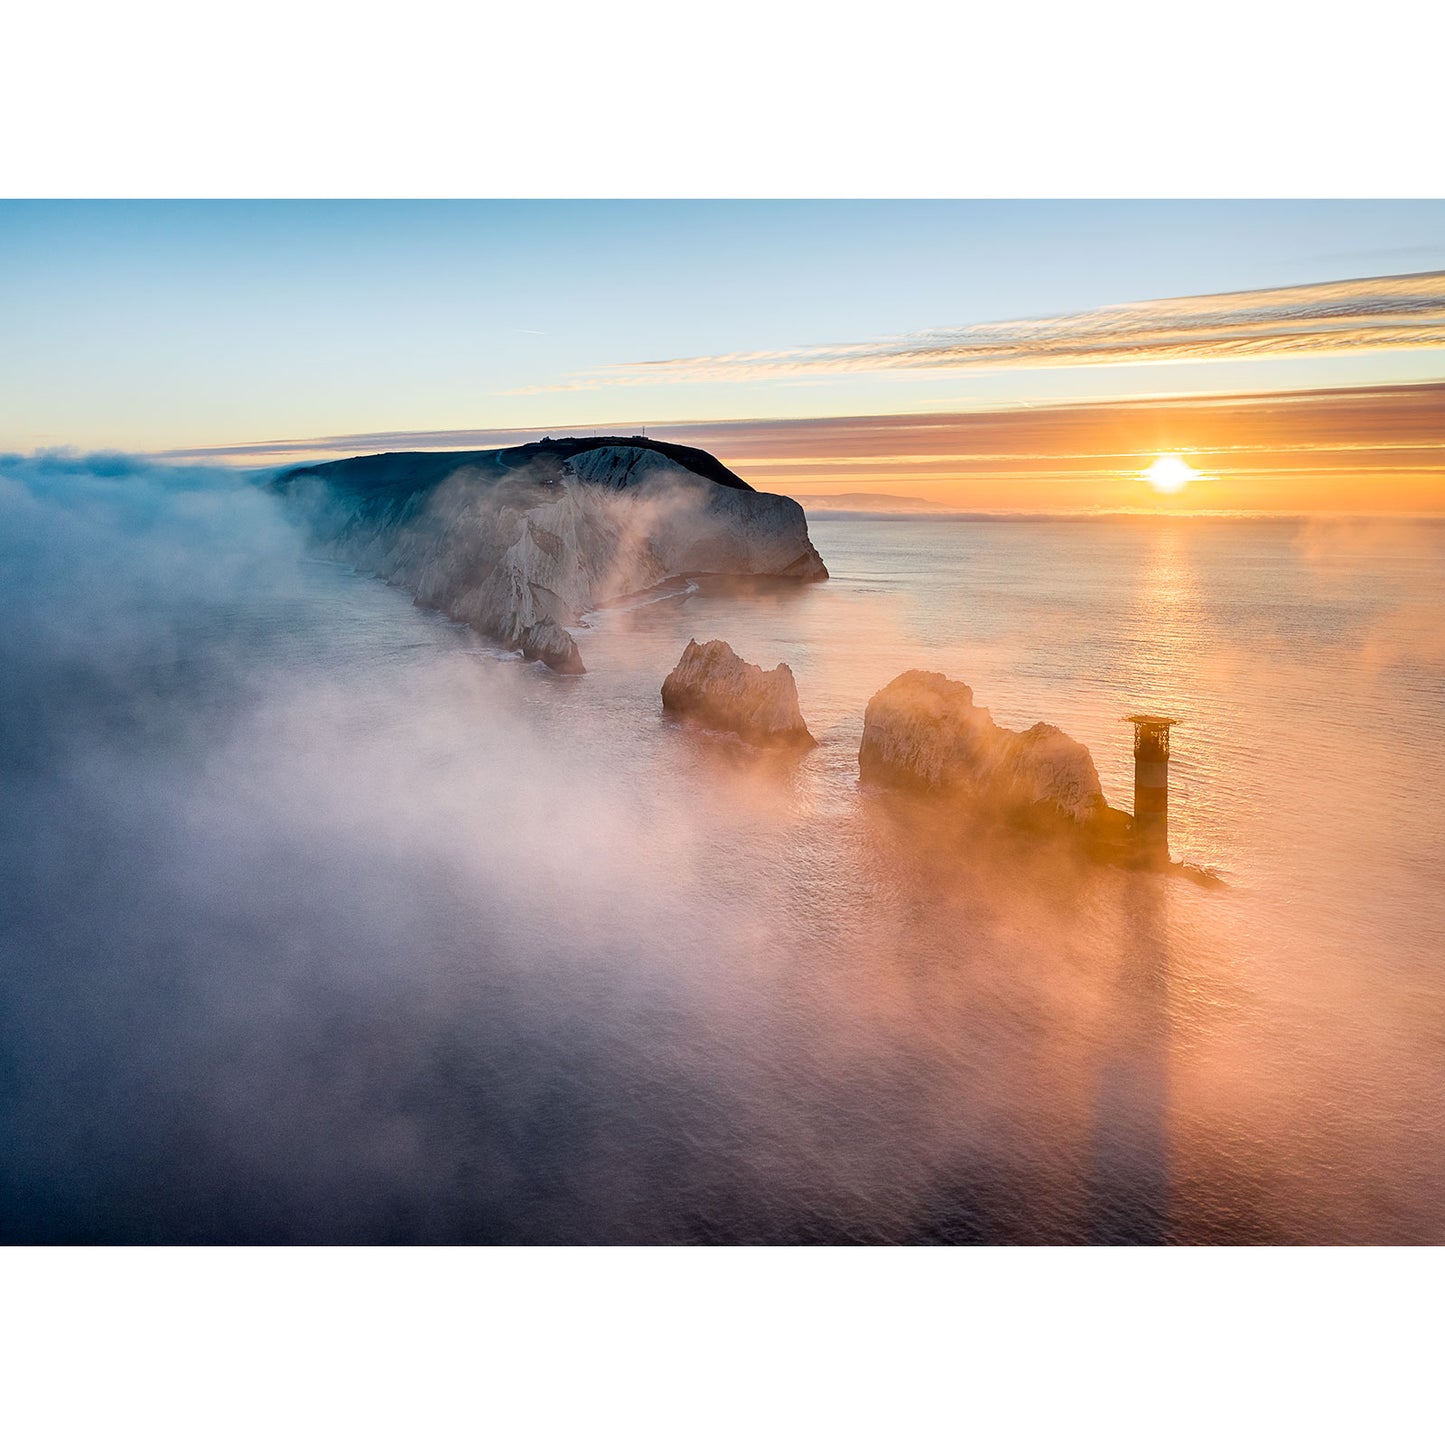 Sunrise over a misty coastline with rock formations and a lighthouse on the Isle of Fog at The Needles by Available Light Photography.